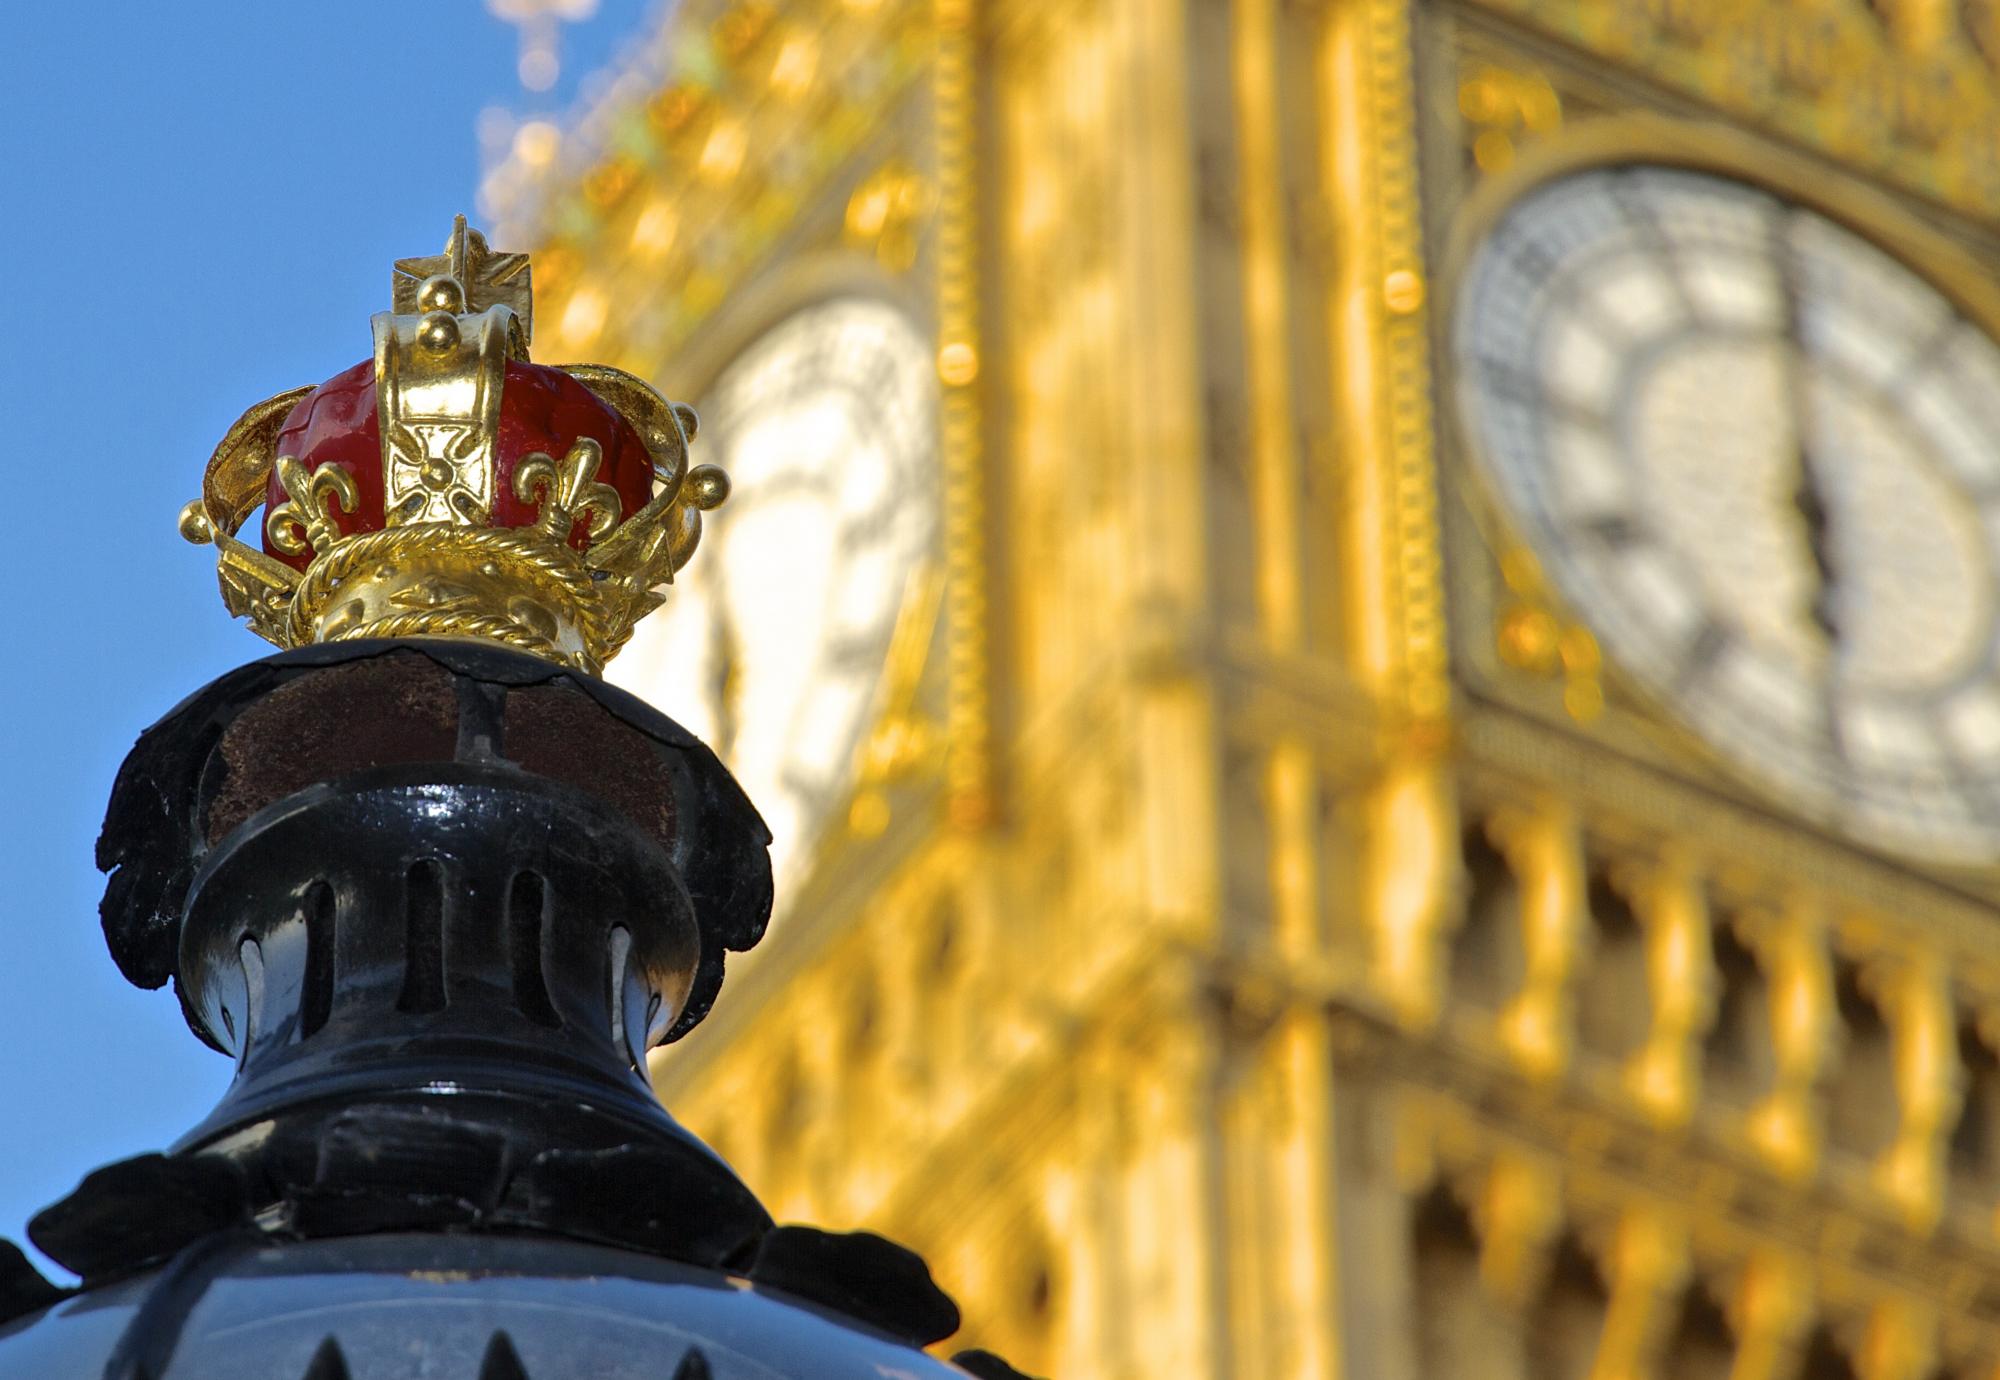 London street lamp with crown on top, Big Ben out of focus in the background